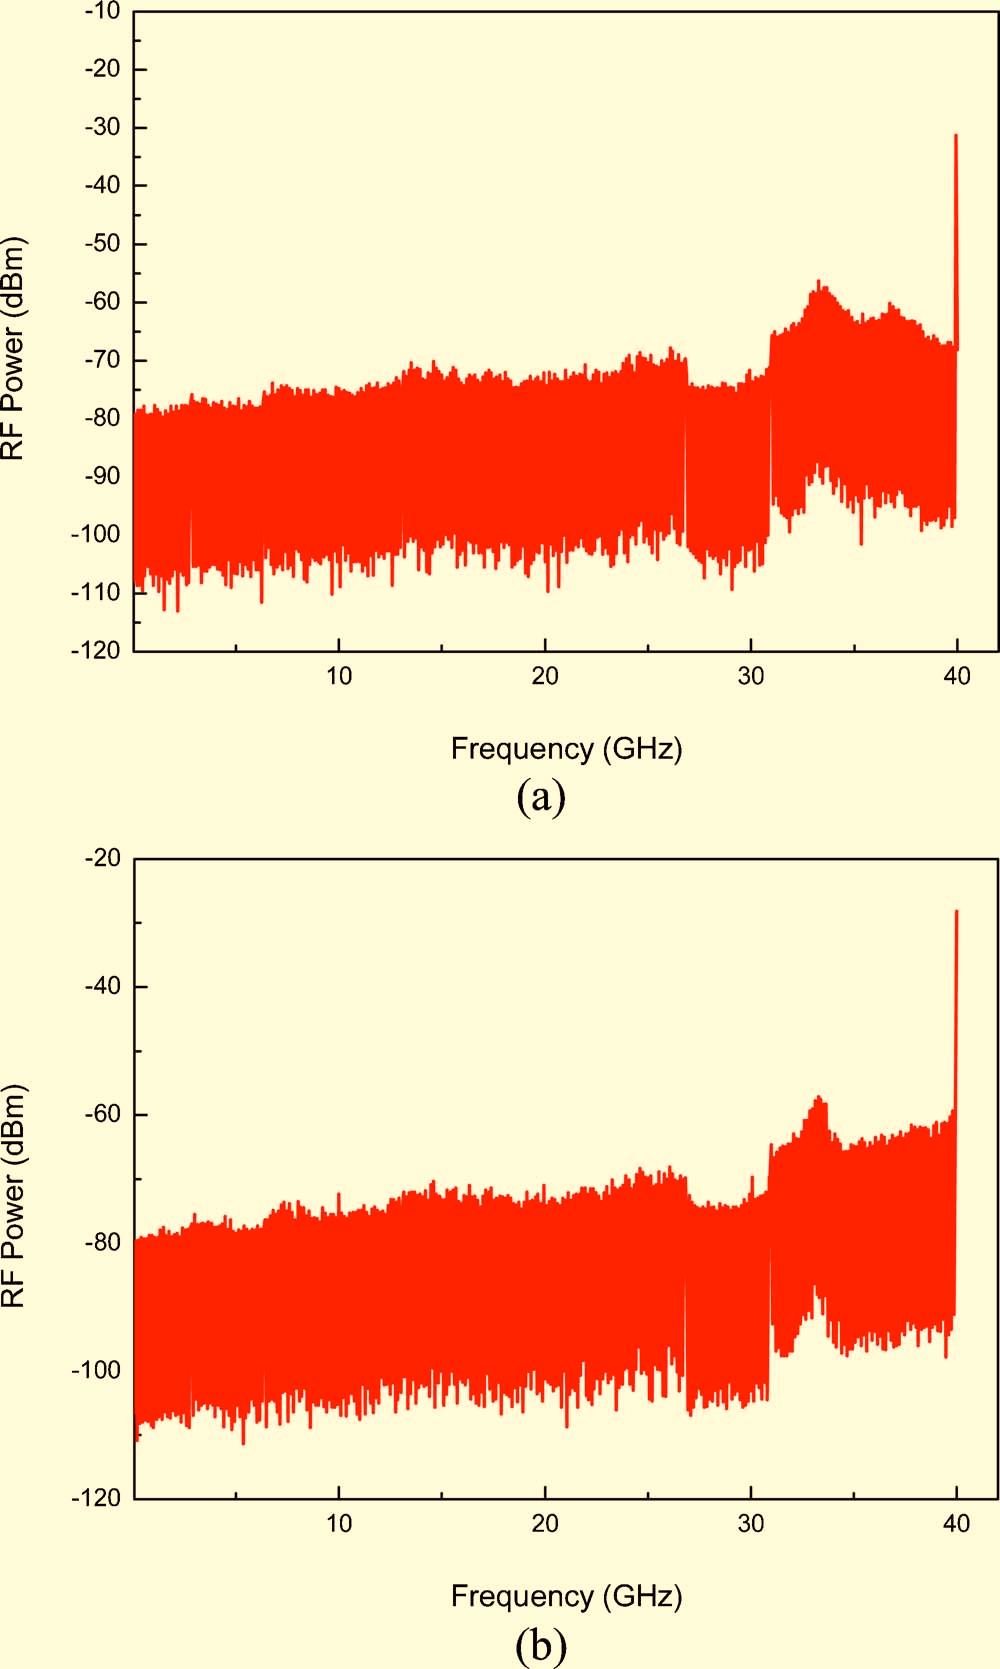 Vol. 8, No. 2 / February 2009 / JOURNAL OF OPTICAL NETWORKING 193 Fig. 3. Electrical spectrum of the generated 40 GHz millimeter-wave signal. (a) BTB, (b) following 50 km of SMF transmission.